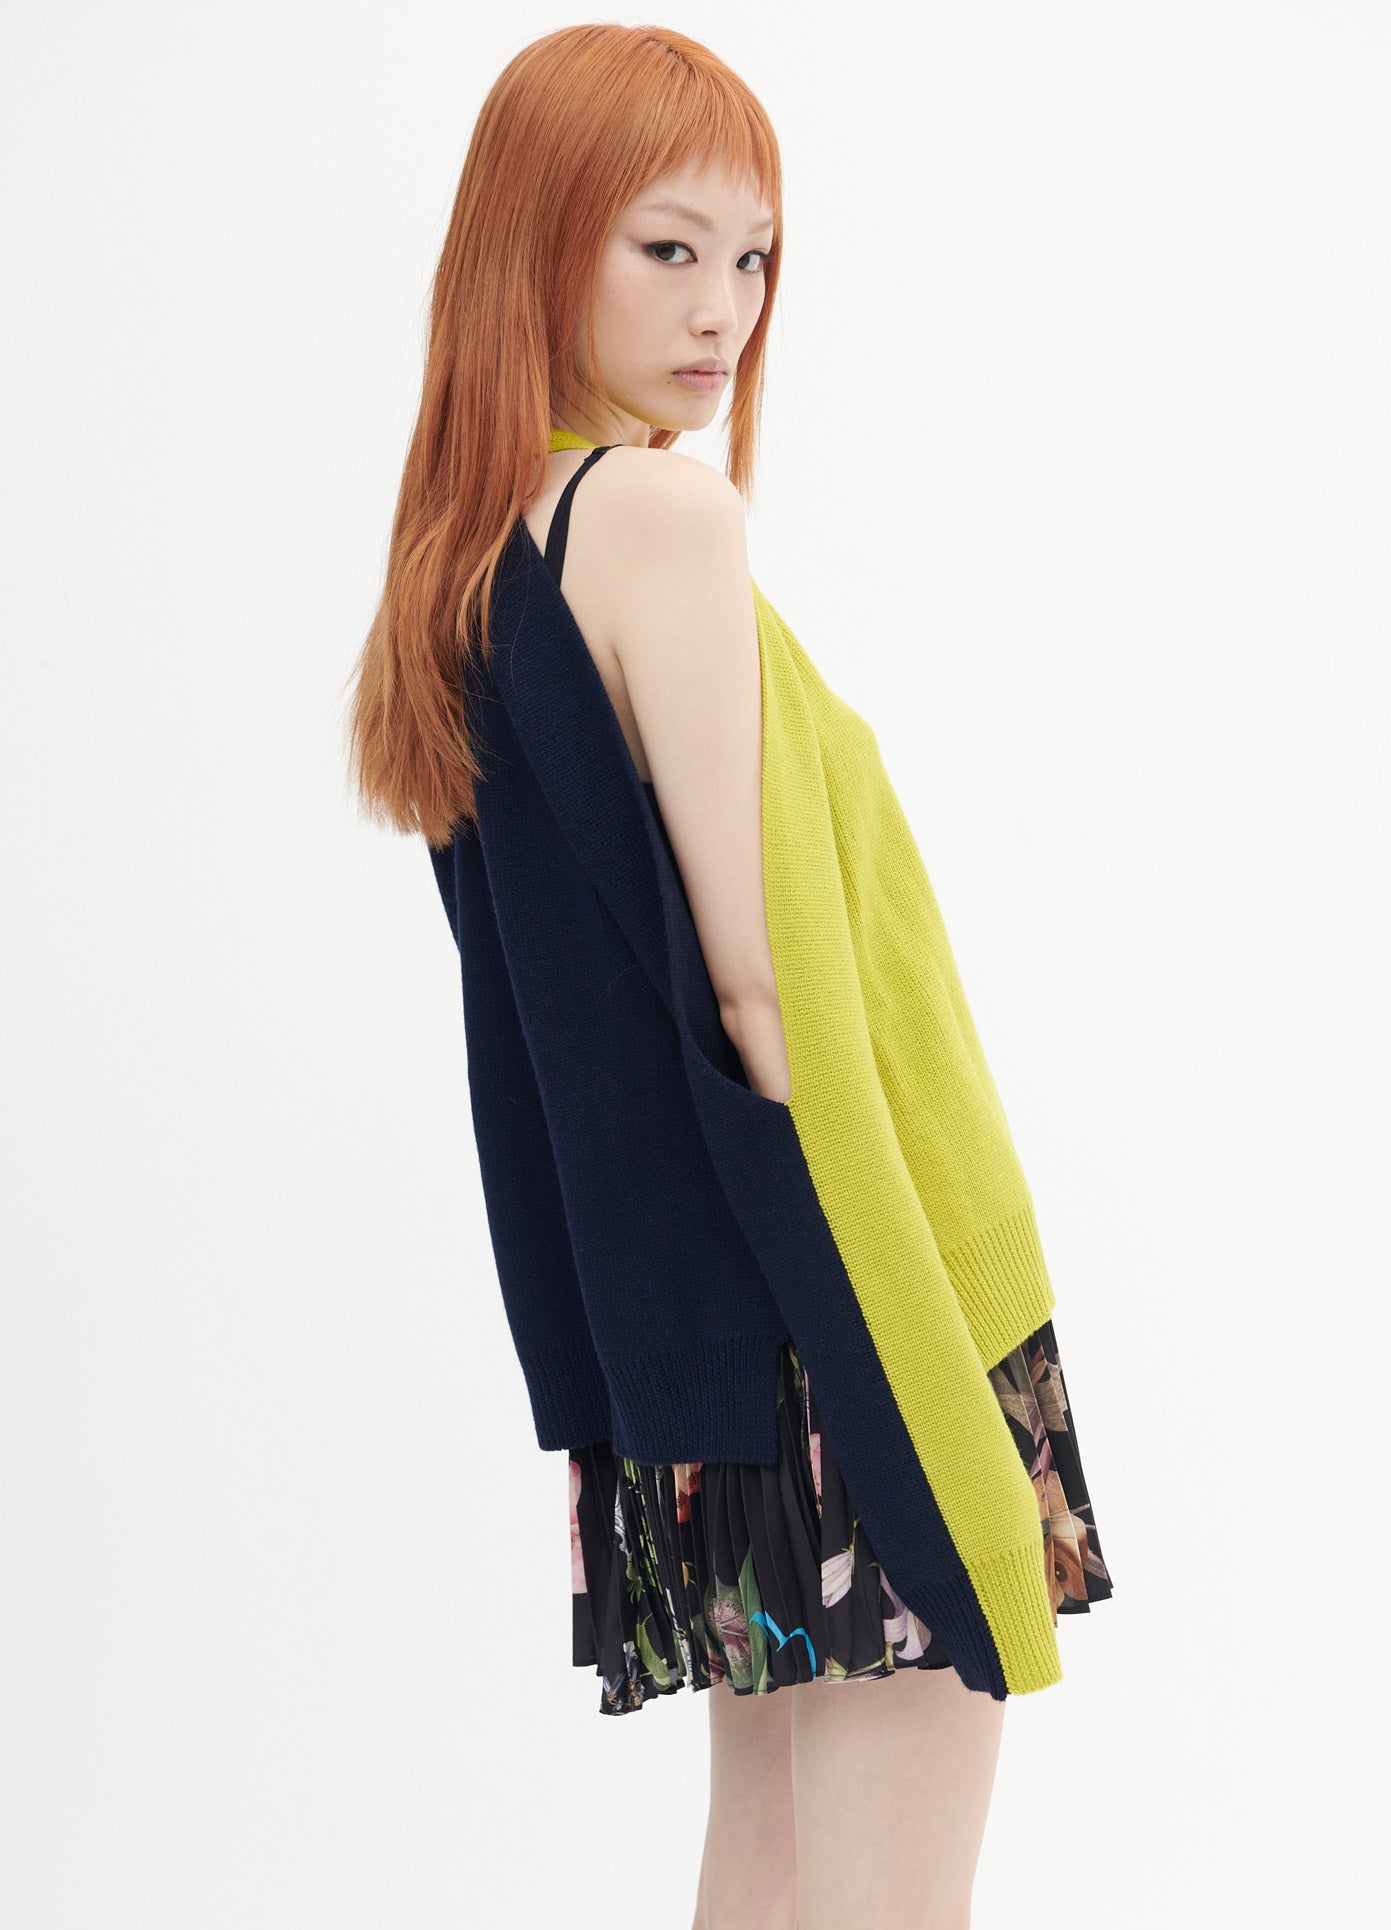 MONSE Two Tone Sleeve Slit Sweater in Lime and Navy on Model Looking Over Shoulder Back View